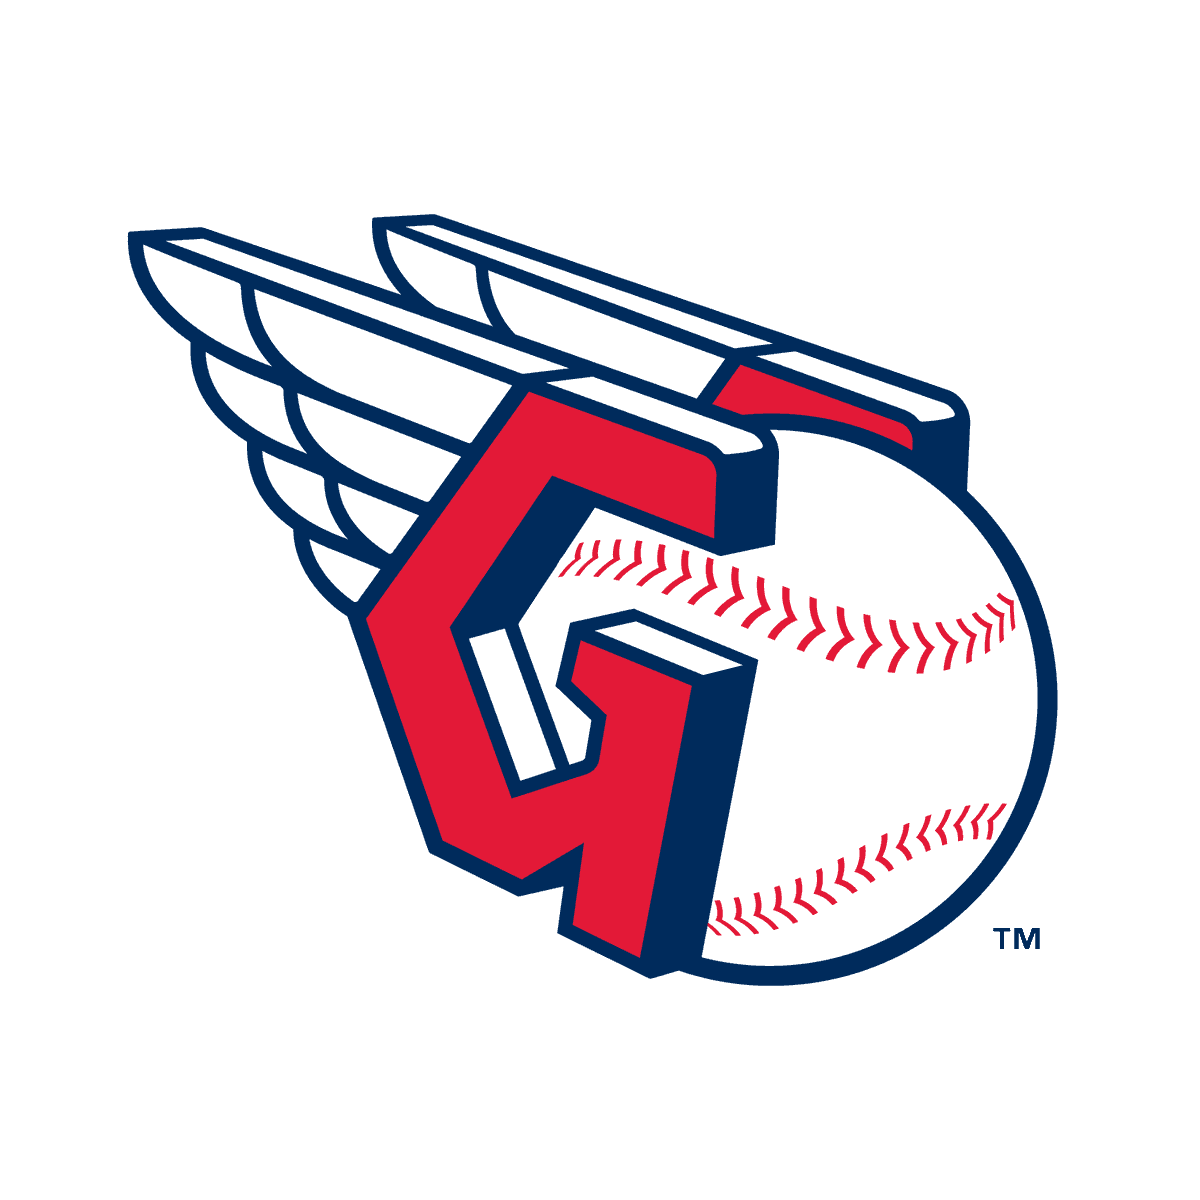 The Cleveland Guardians play the Minnesota Twins today at 7:40pm! Tune in to hear the broadcast on WLEC at 7:05pm. https://t.co/vN4NSYqPxl